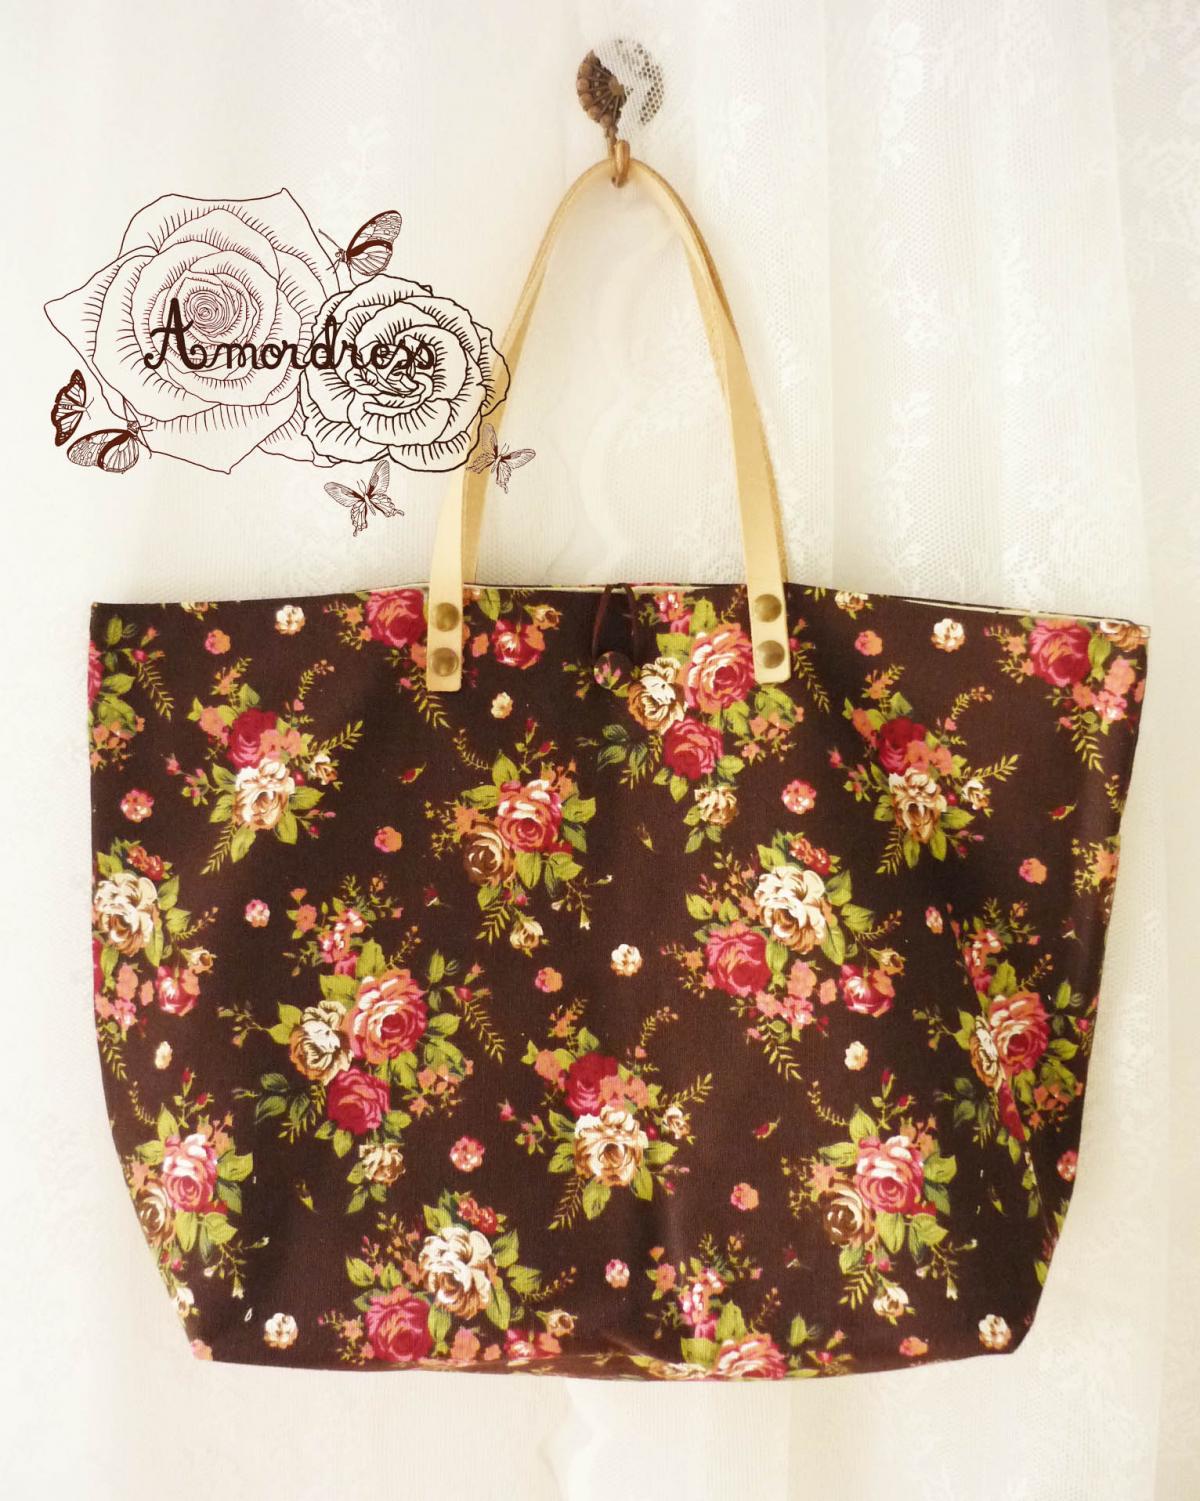 Floral Tote Bag Printed Canvas Bag Genuine Leather Strap Brown With Pink Rose Shabby Chic Bag ...amor The Inspired Collection...